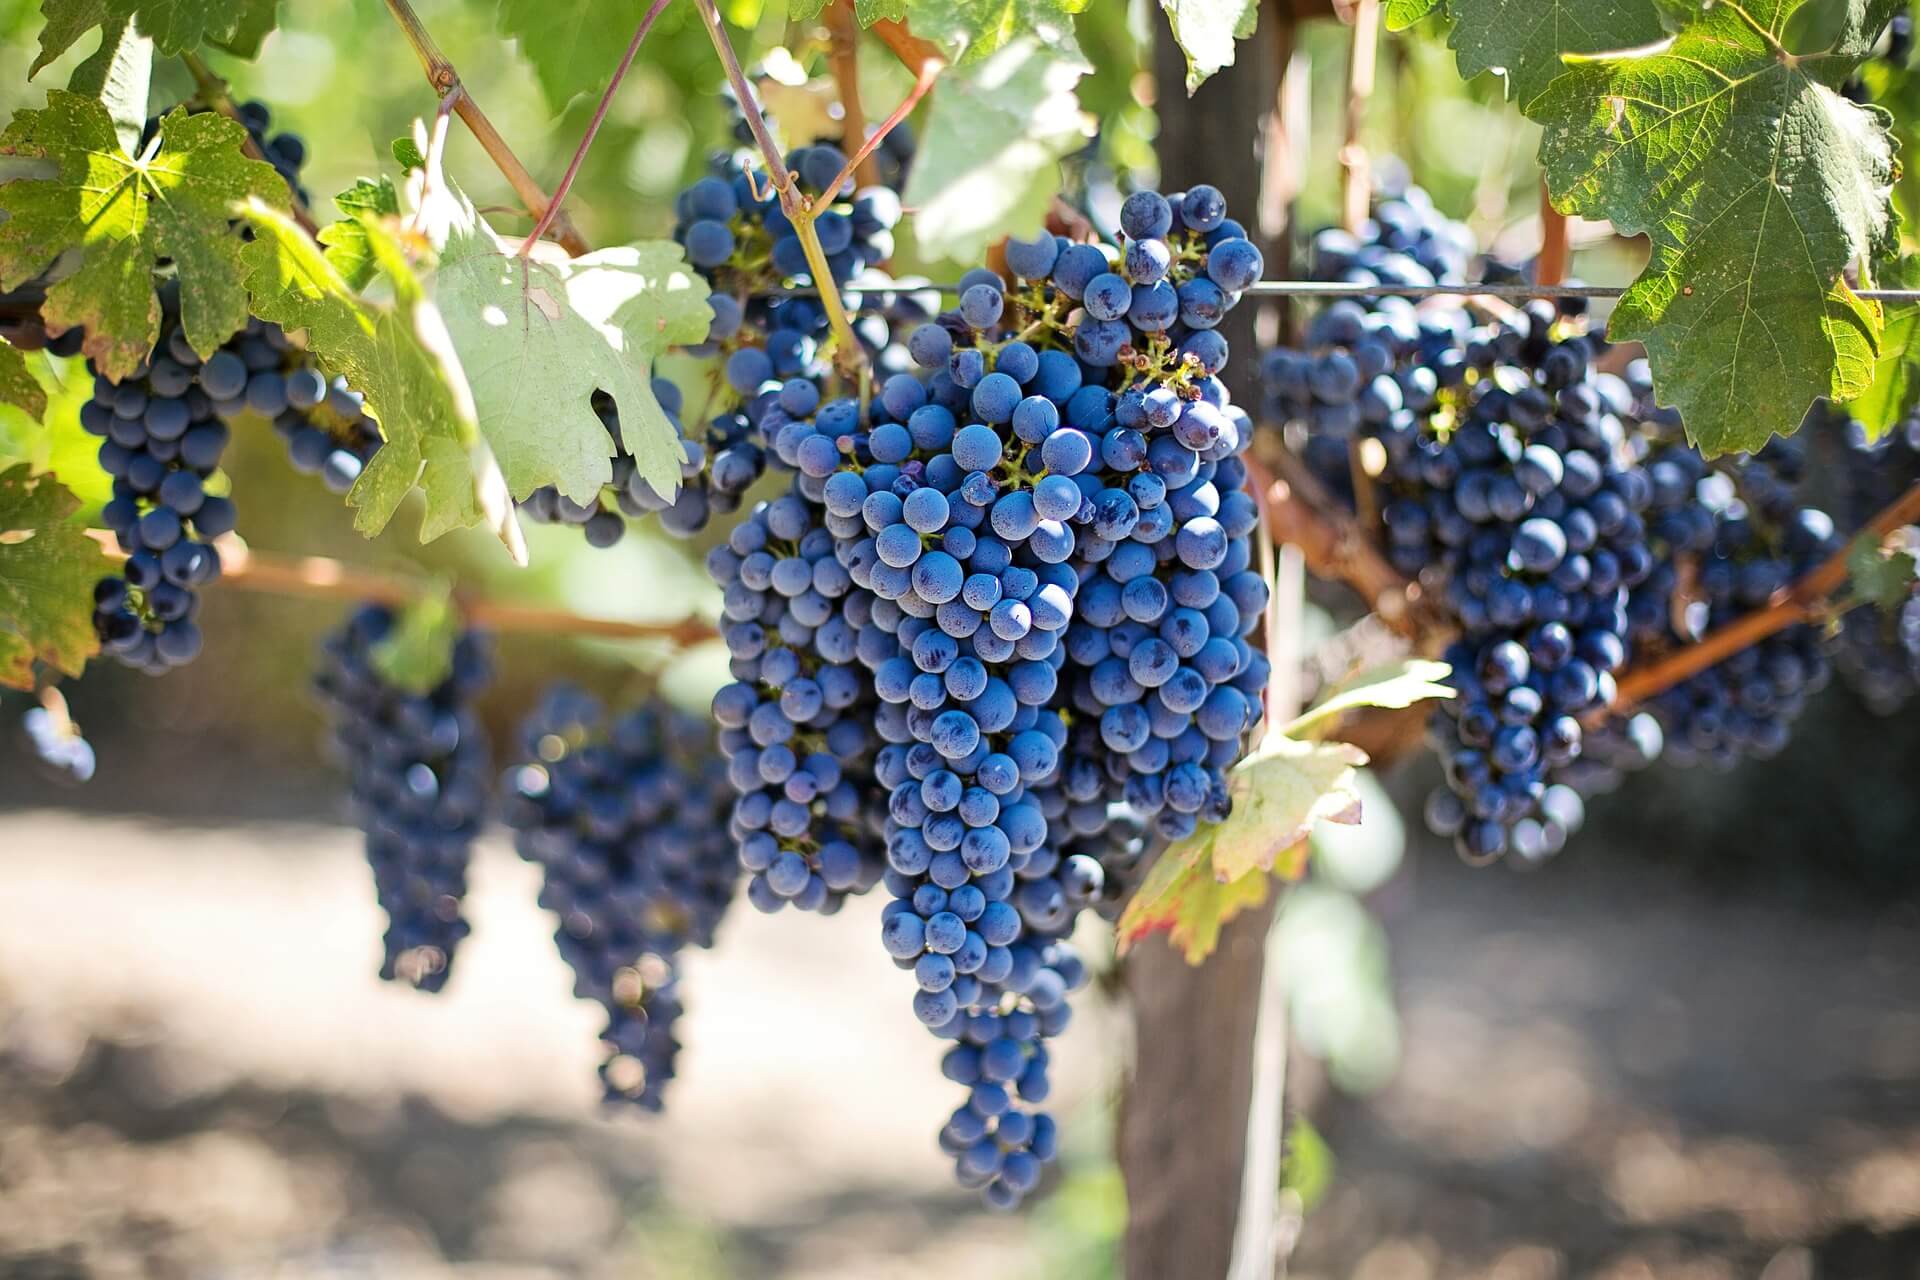 Photograph of grapes in vineyard